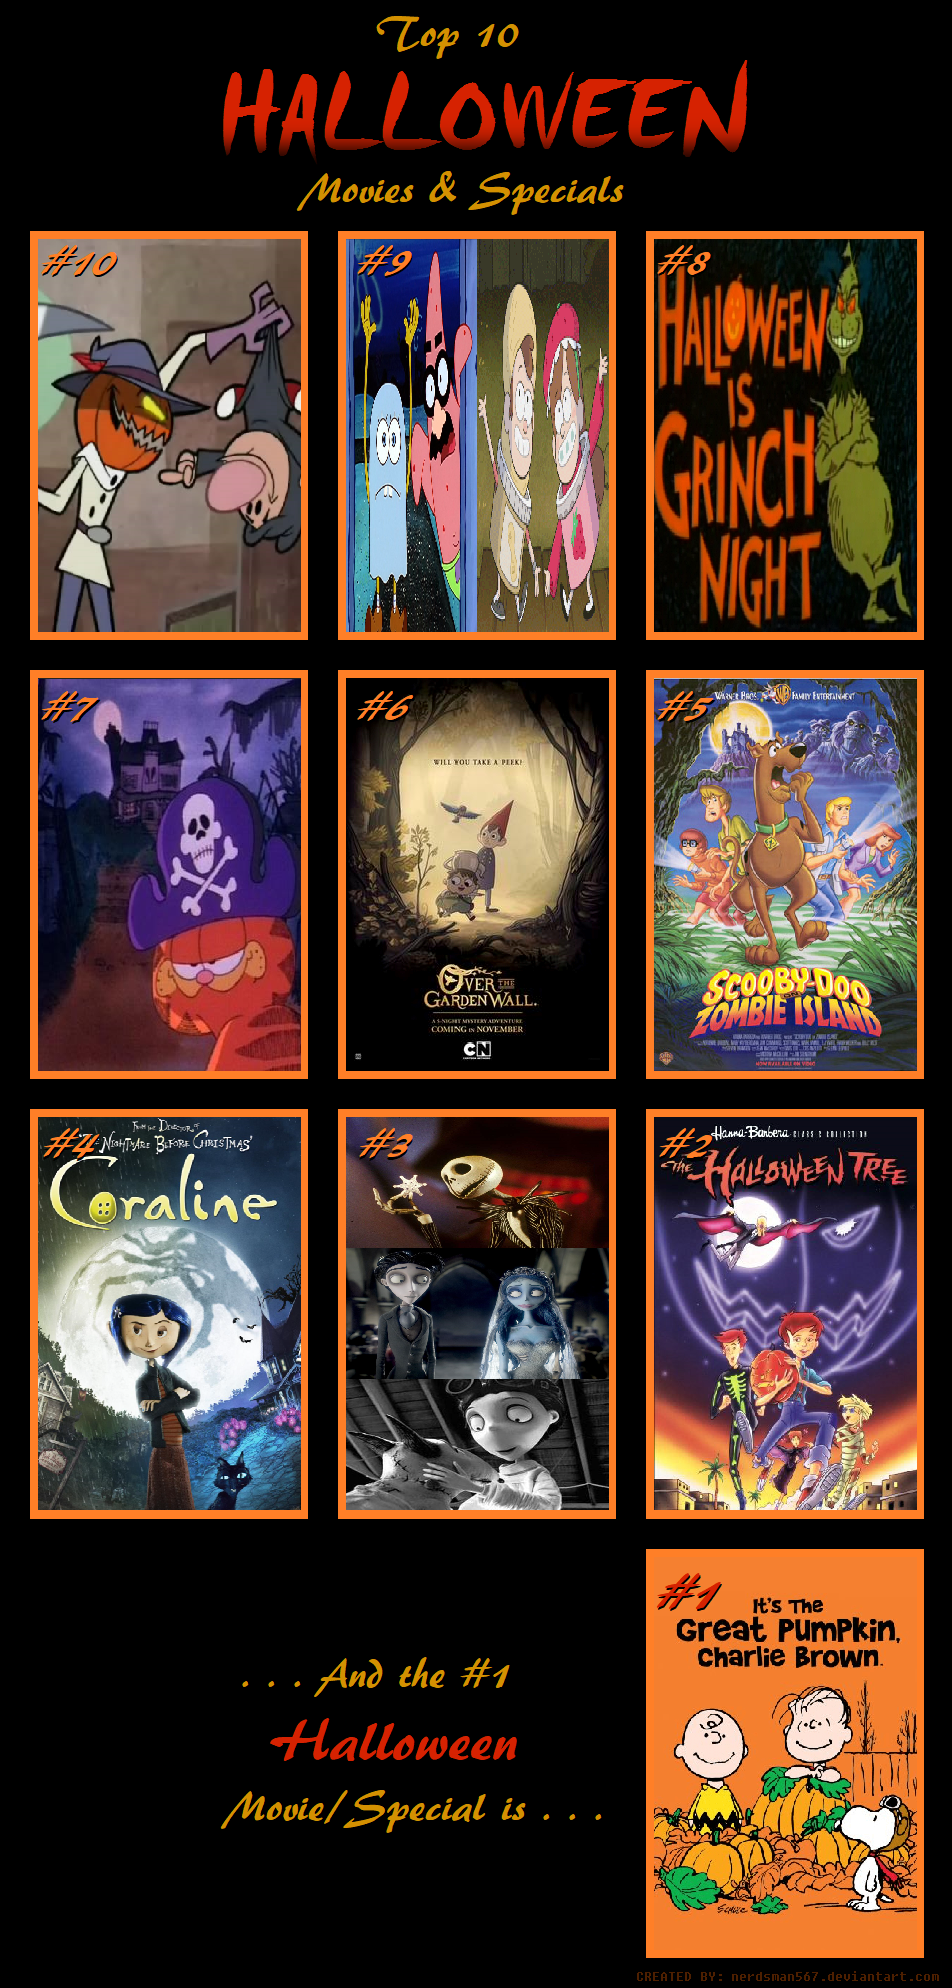 Top 10 Halloween Movies and Specials (Animated) by nerdsman567 on DeviantArt